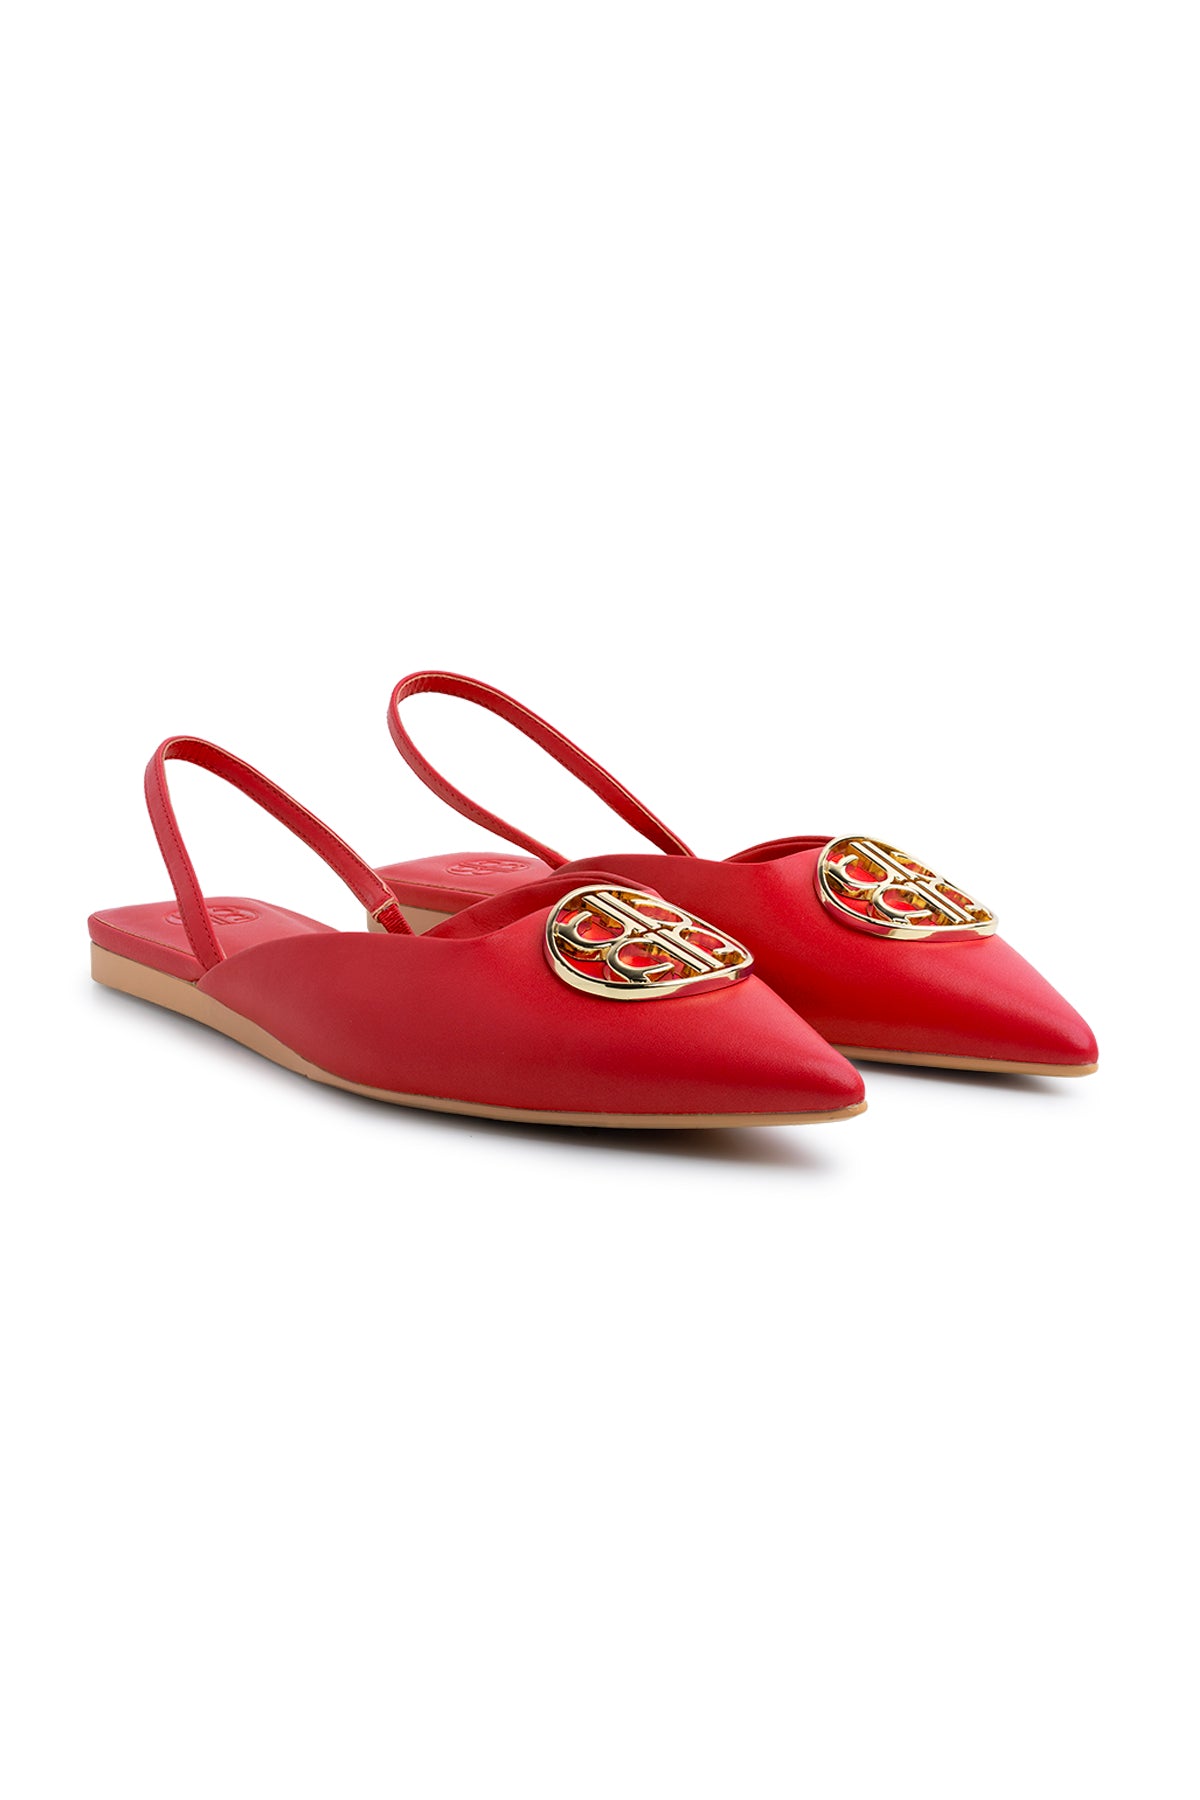 The Camille Slingback Shoes - Red